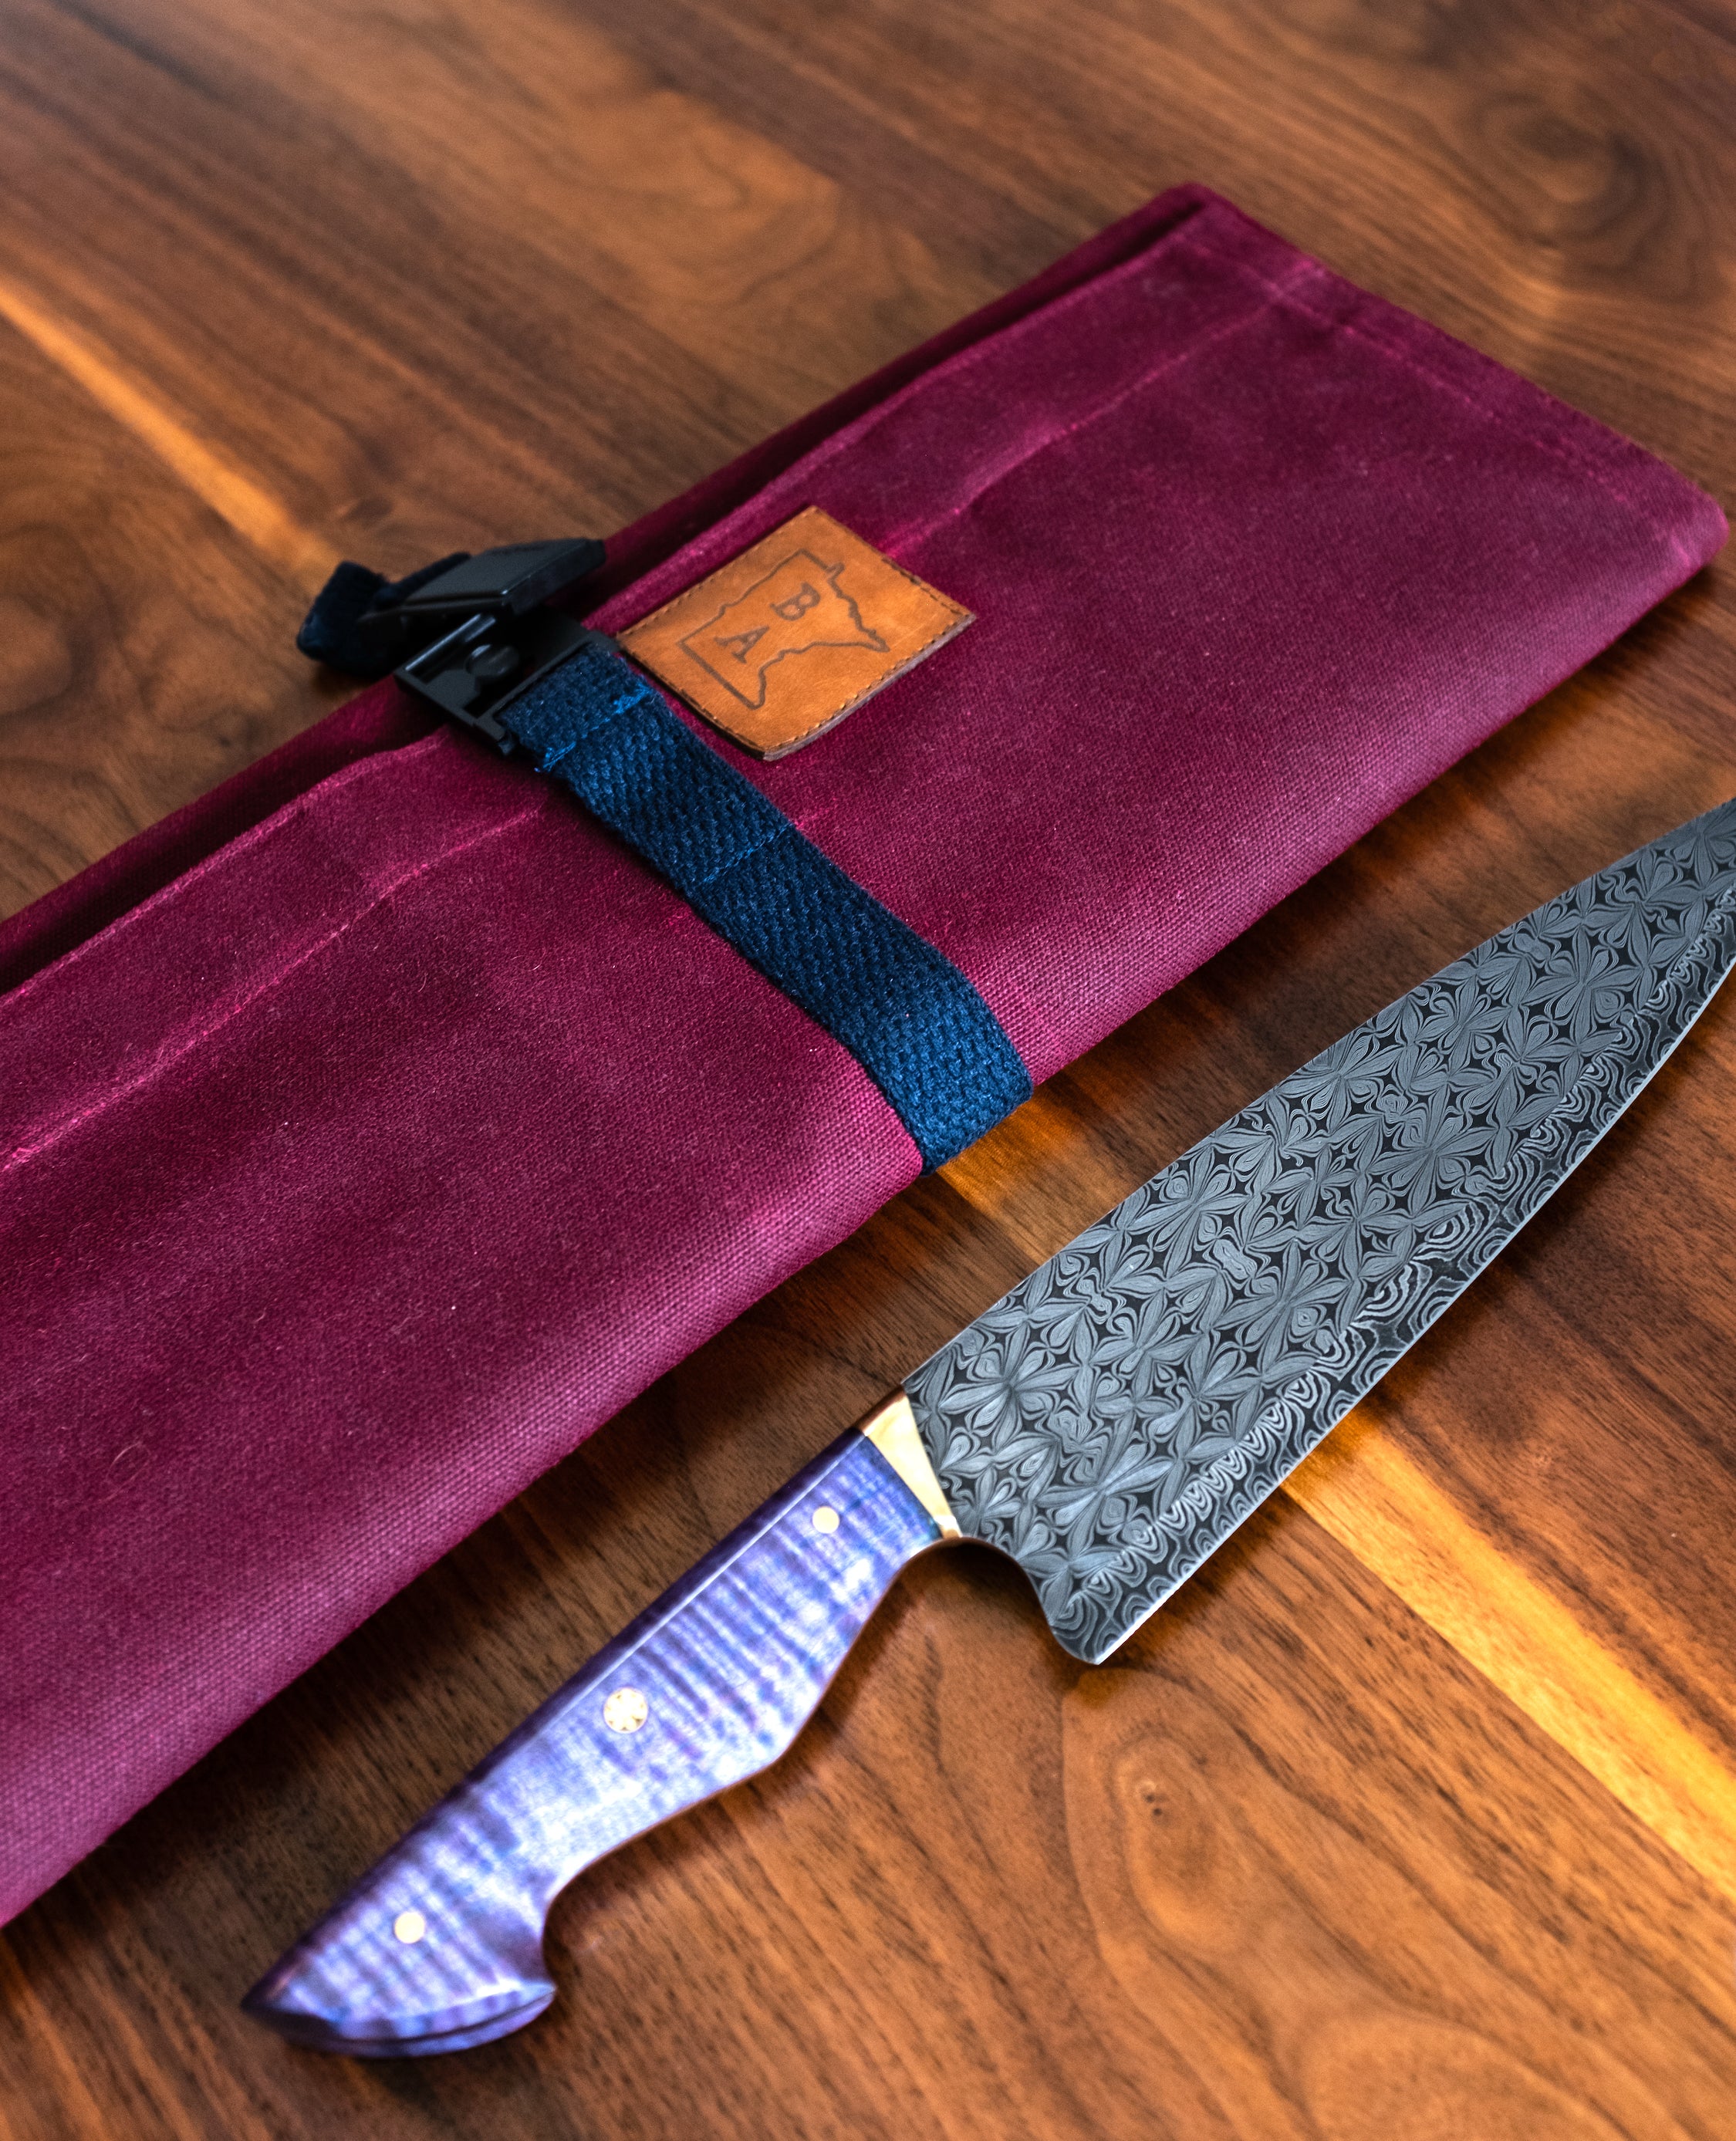 Angled product shot of a knife lying next to Side Hustle -Burgundy- knife roll. From Craftmade Aprons, based in Minnesota.